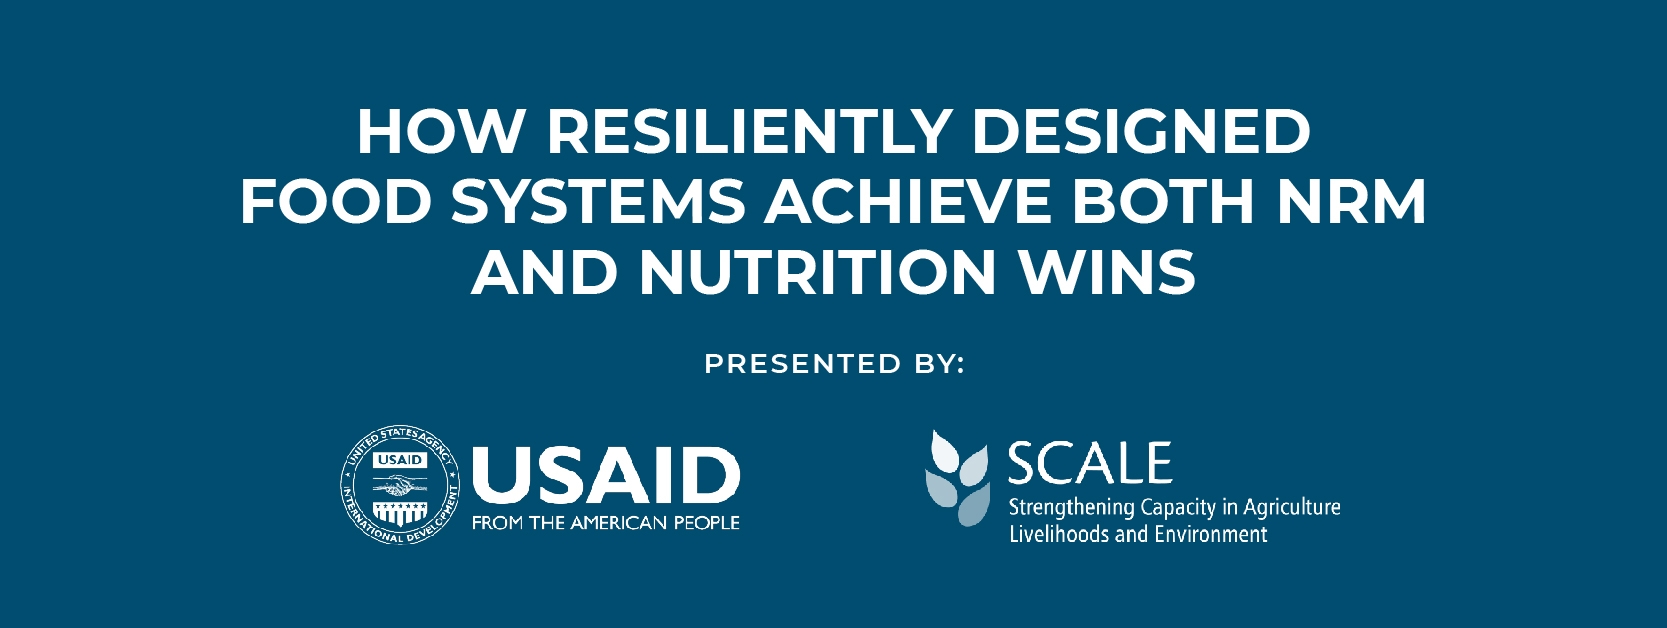 How Resiliently Designed Food Systems Achieve Both NRM and Nutrition Wins